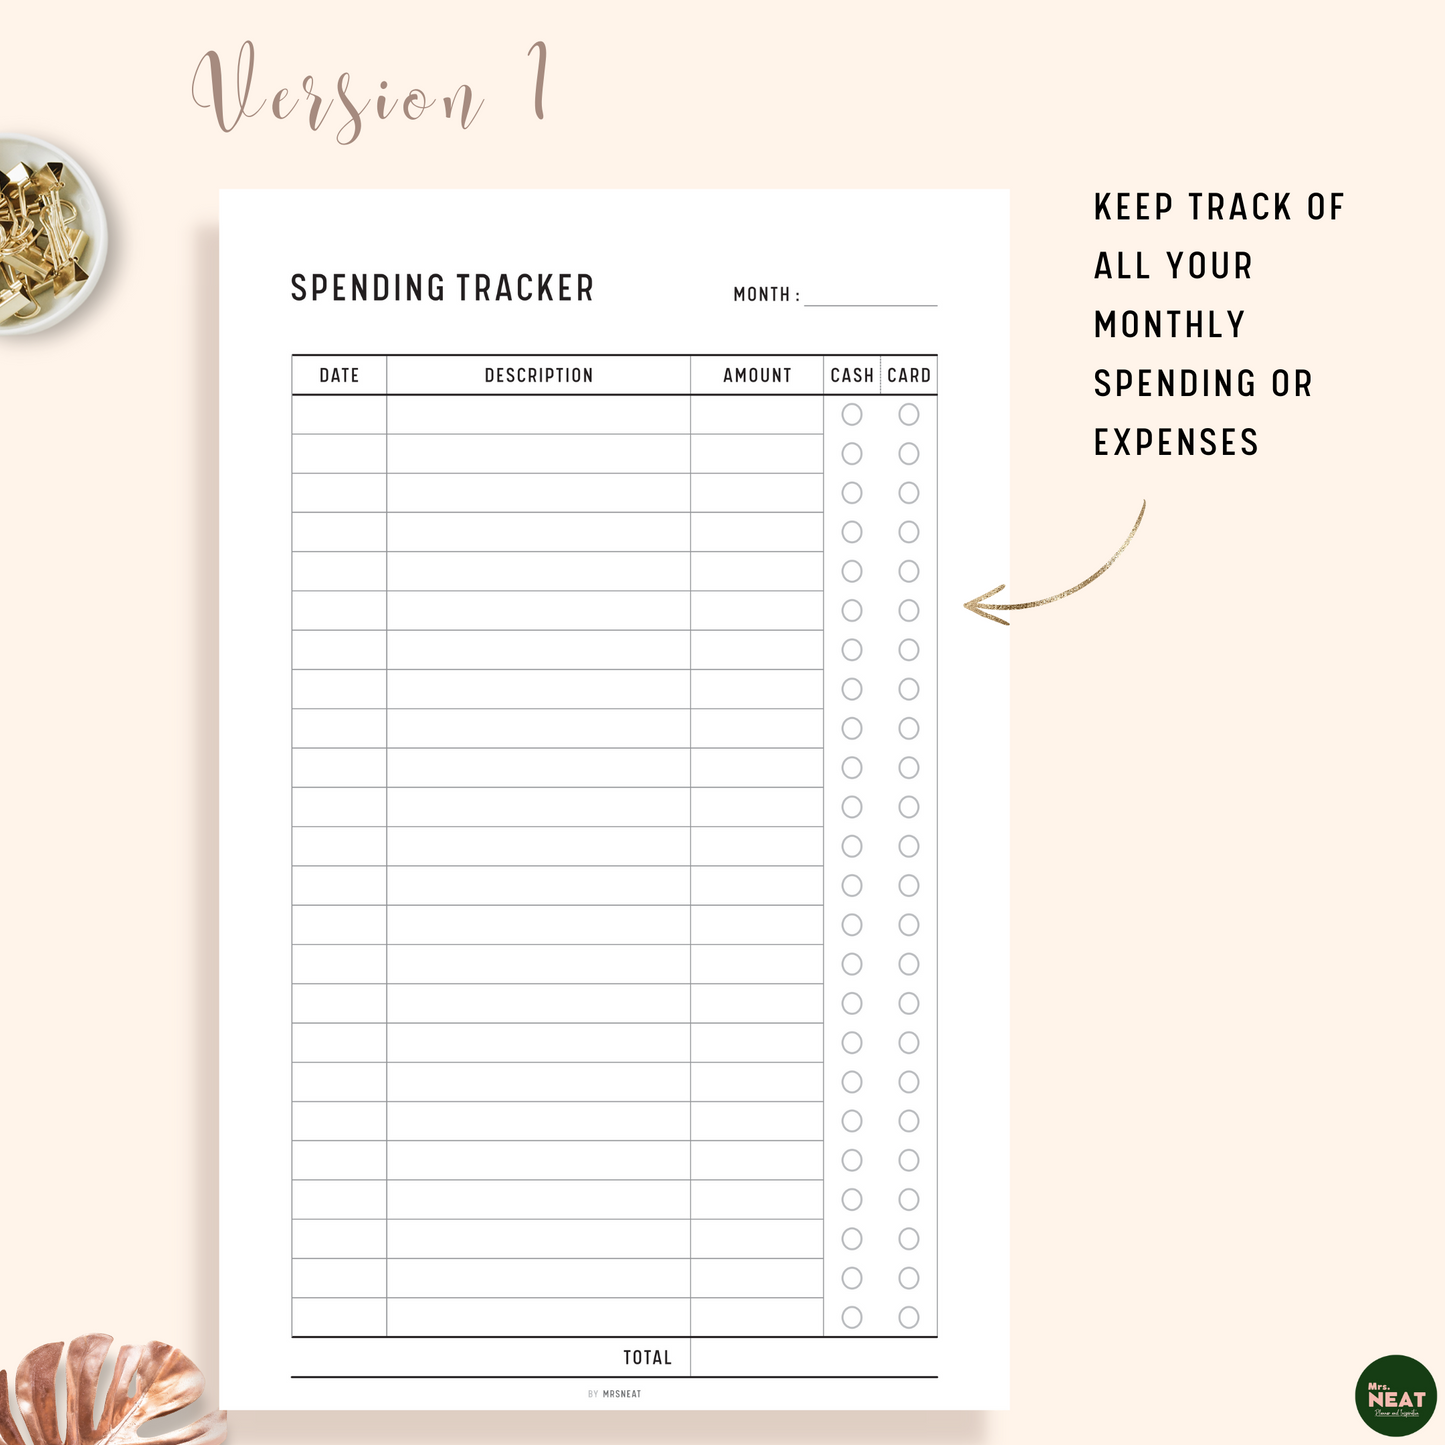 Spending Tracker Planner with room for date, description, amount and 2 payment options